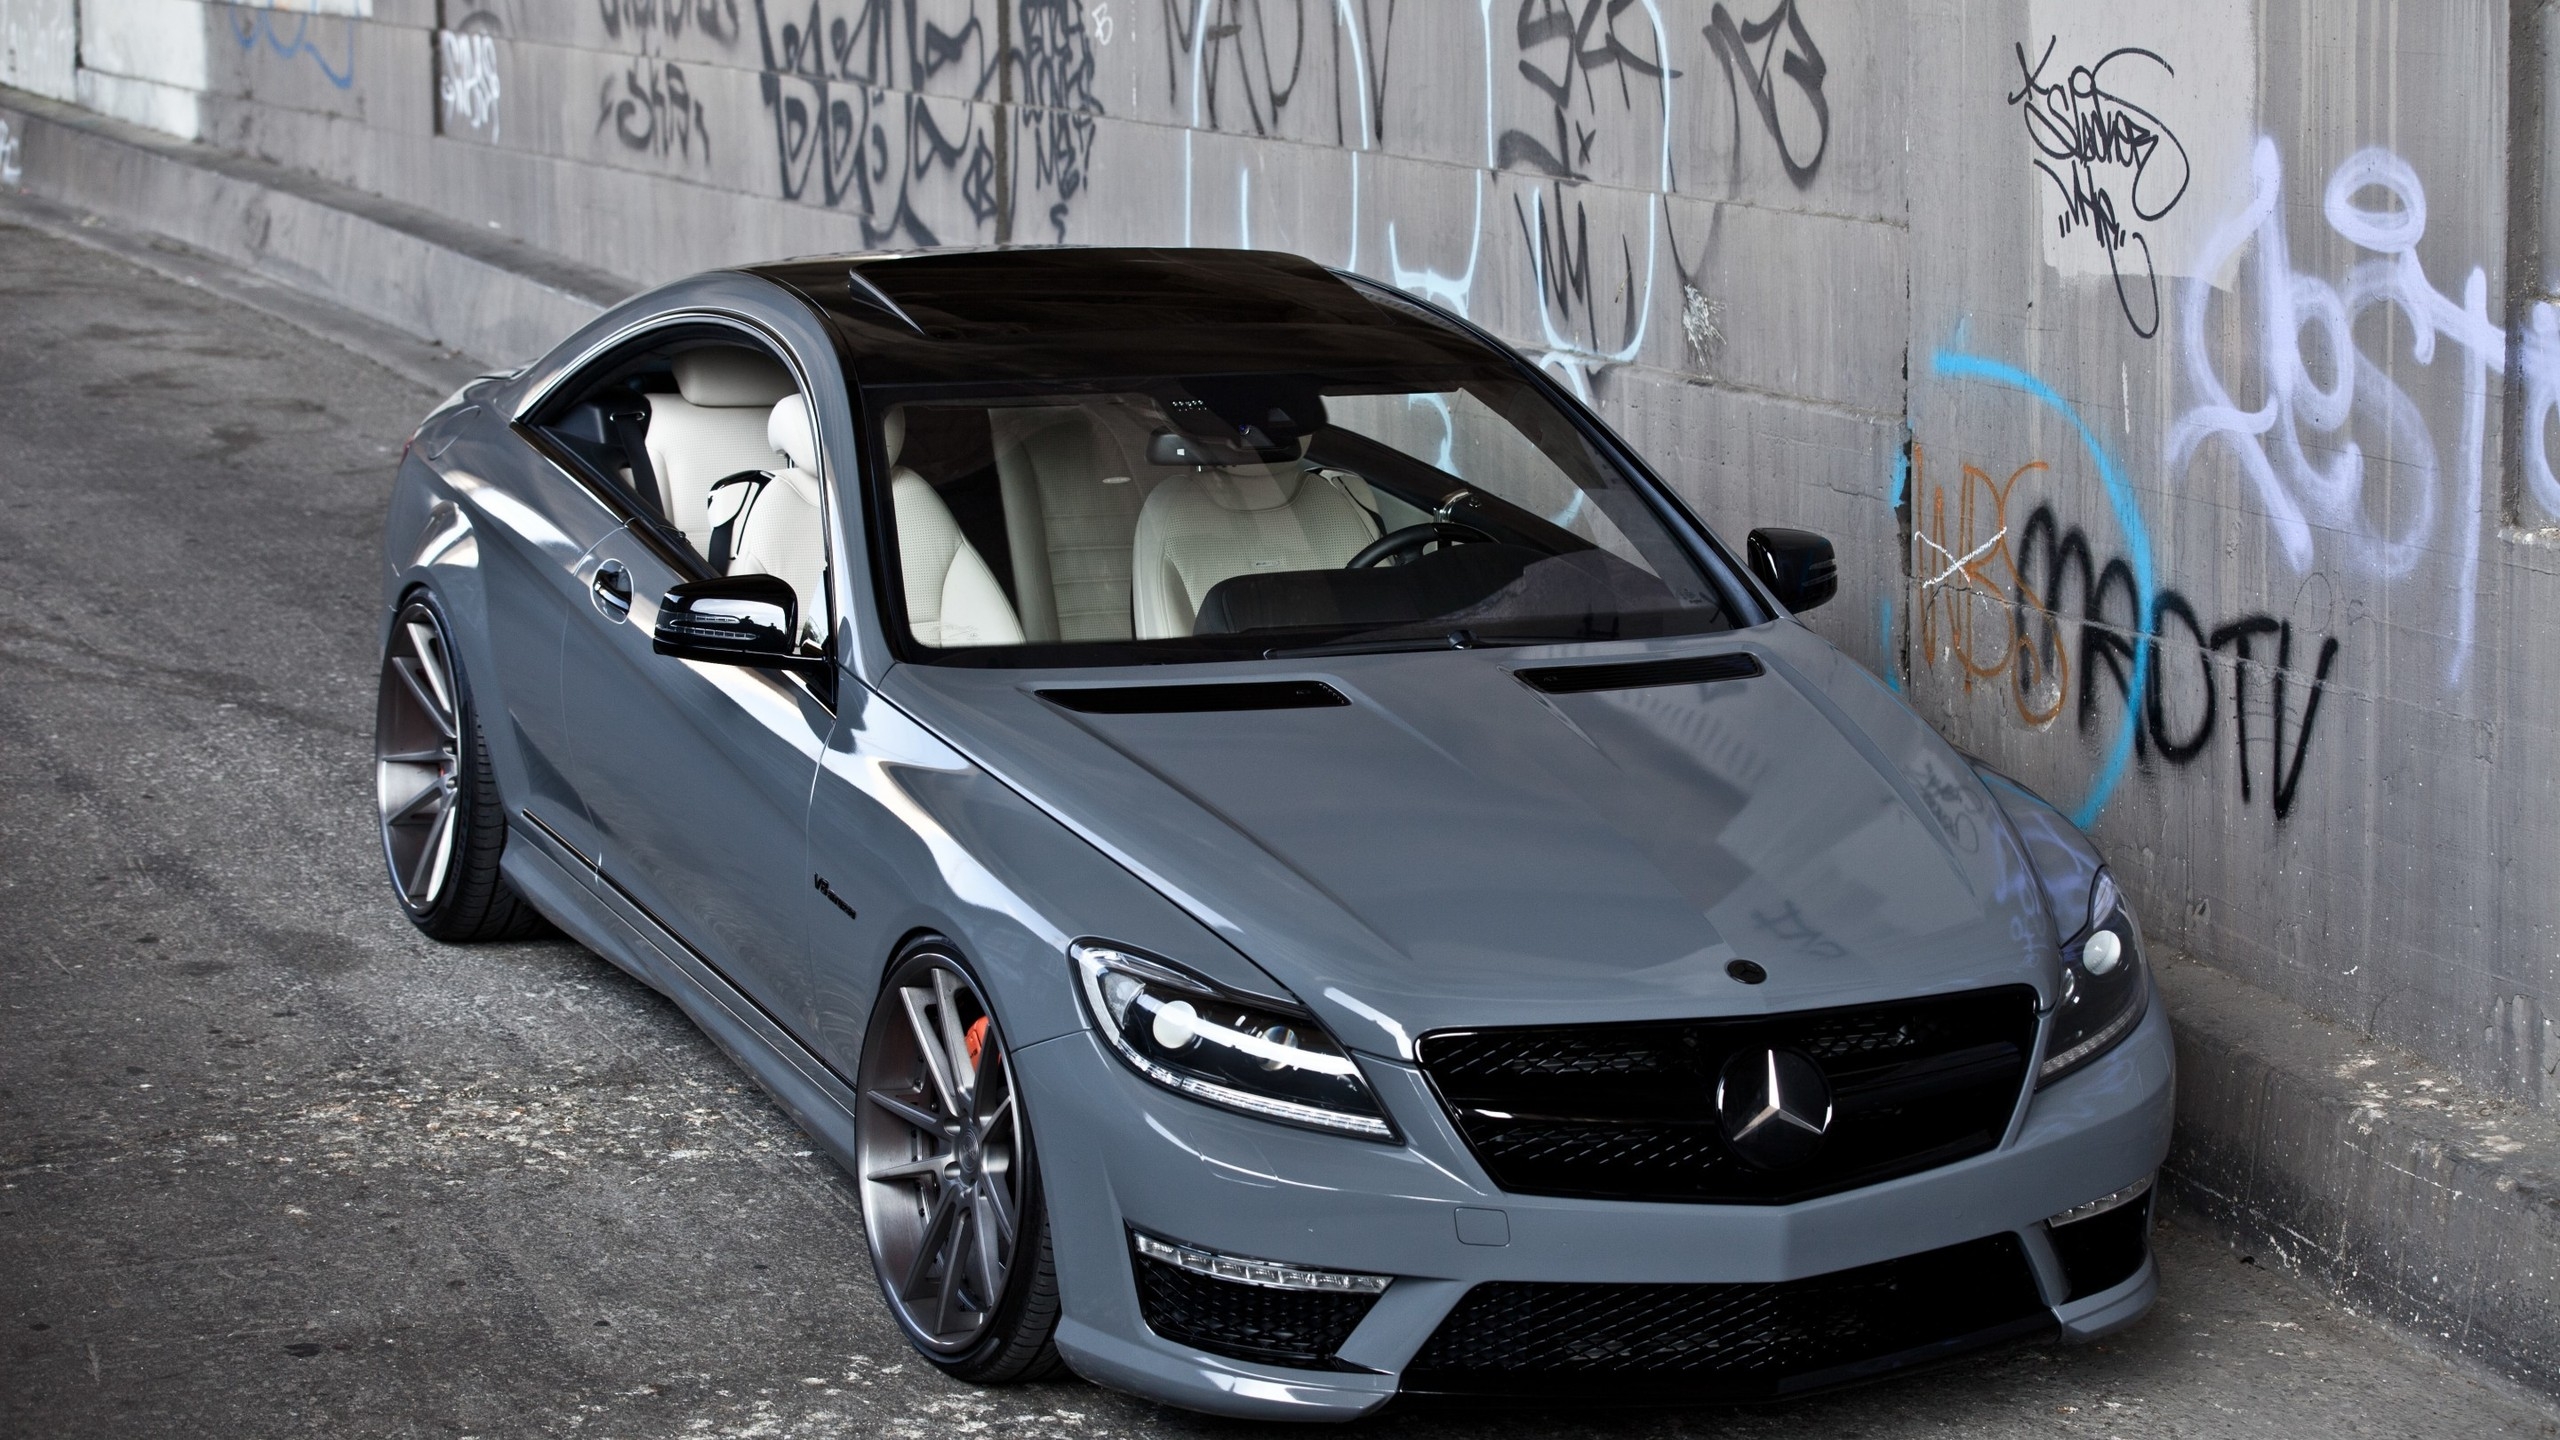 Mercedes CL63 AMG for 2560x1440 HDTV resolution